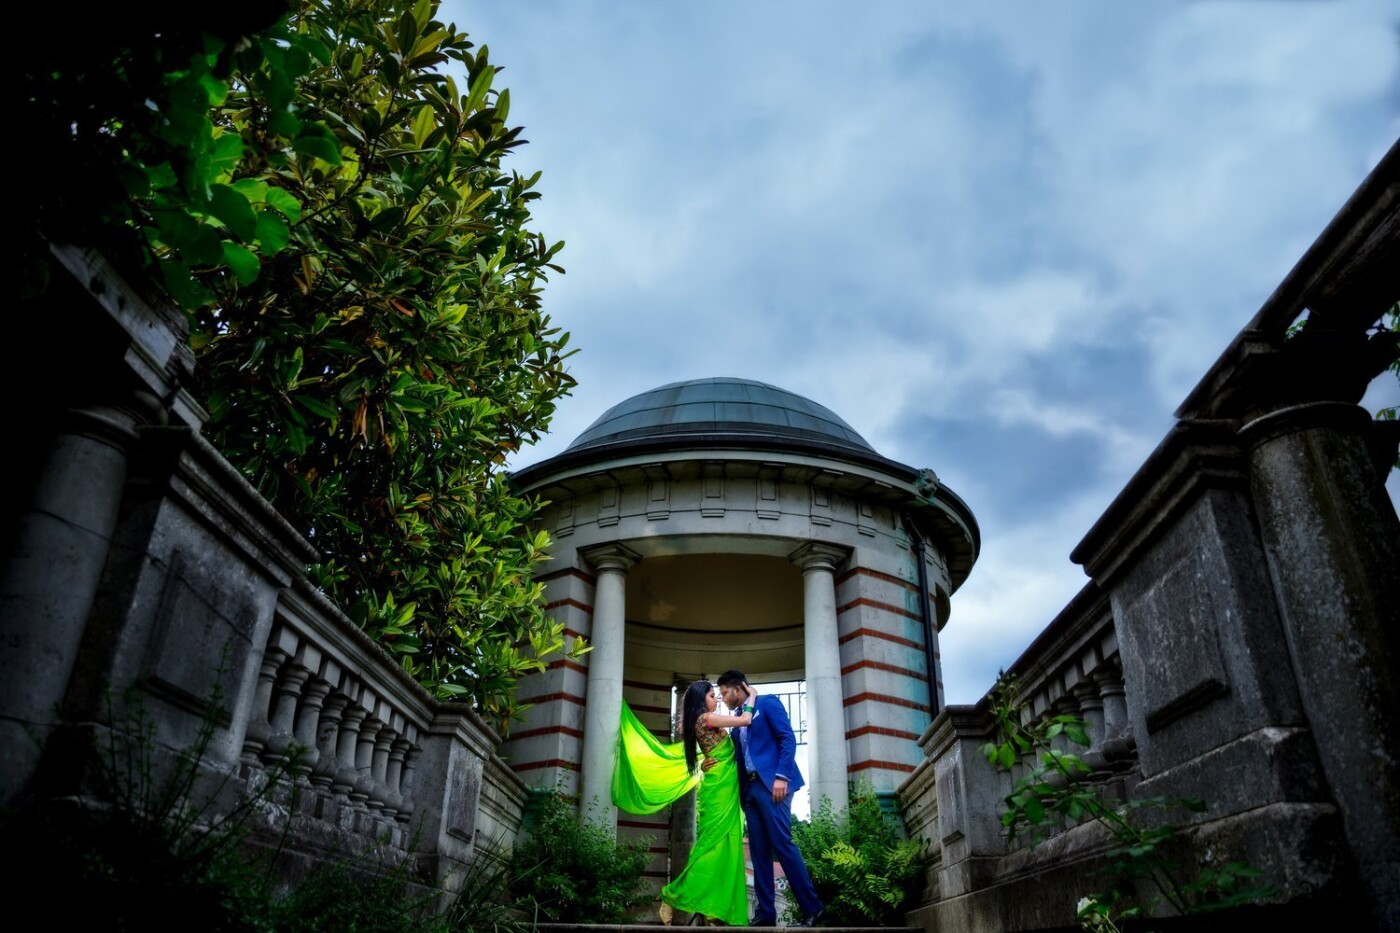 As we approached the last hours of shooting, we started heading back towards our cars. As we walked up an exhausting row of stairs, we ended up in front of this stunning opening in one of London’s secret treasure locations. I couldn’t help but admire how beautifully the colour of the bride’s sari complemented the view. I just knew I had to capture Venthan & Poorani’s romance amidst such dramatic scenery.